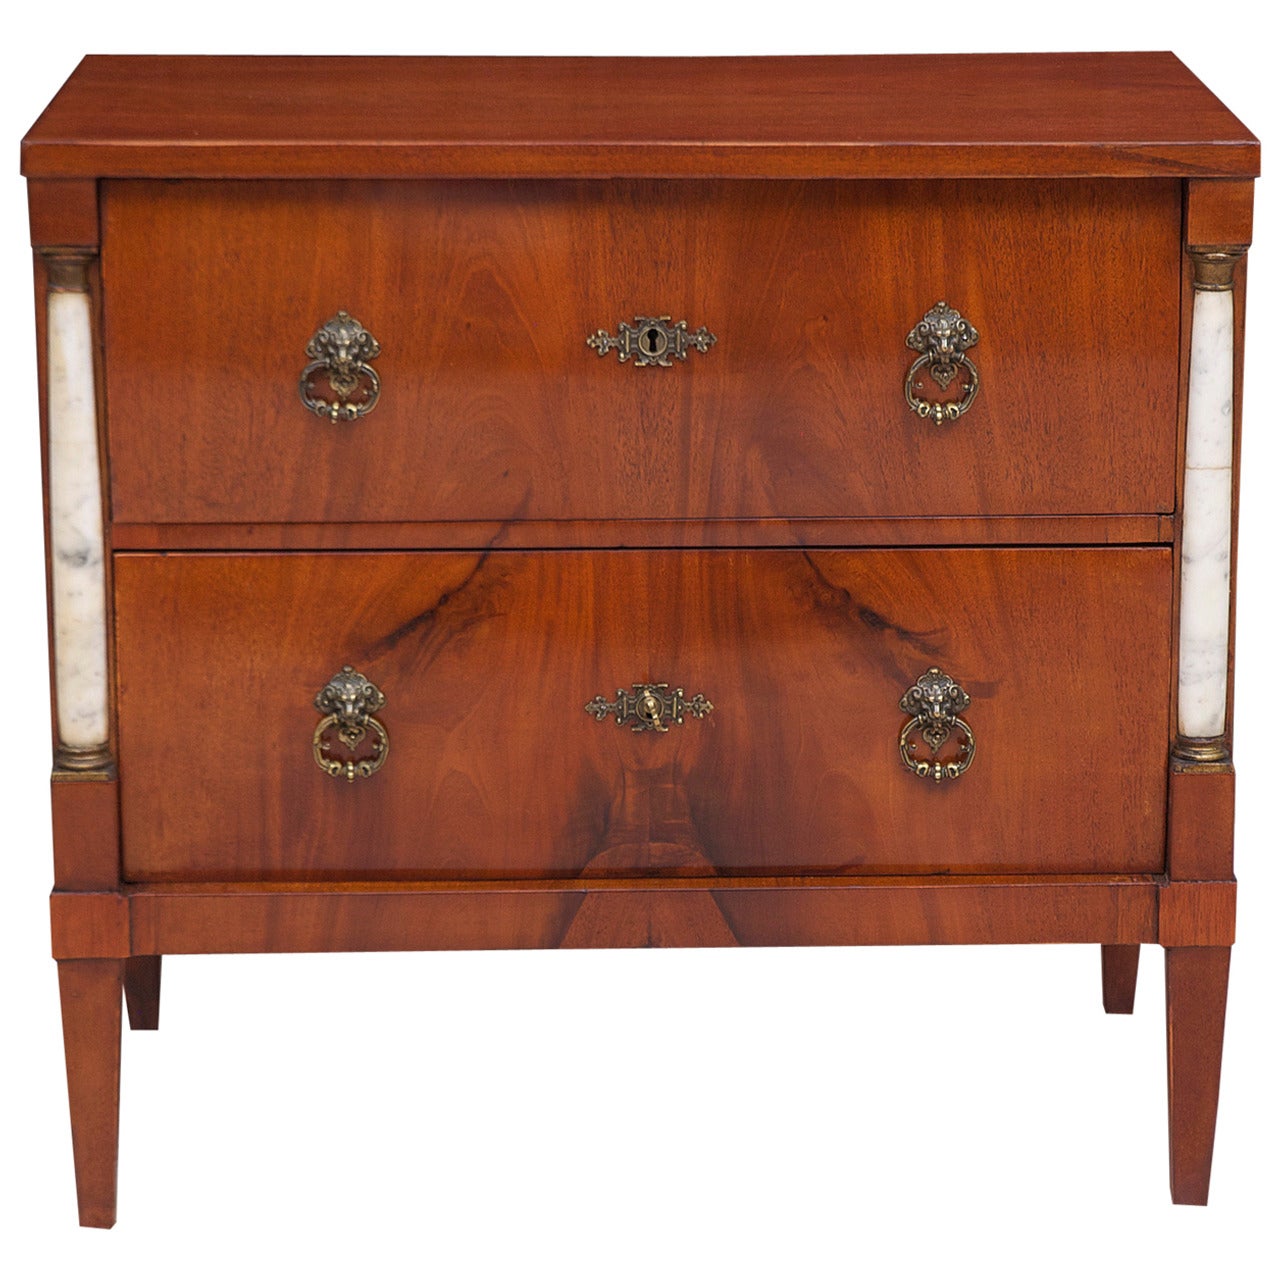 A beautiful Empire commode in Cuban mahogany with marble columns flanking two drawers and resting on tapered square feet. Brass key plates and pulls were added in the late 1800s. French-polish finish. Comes with one key that operates both drawers